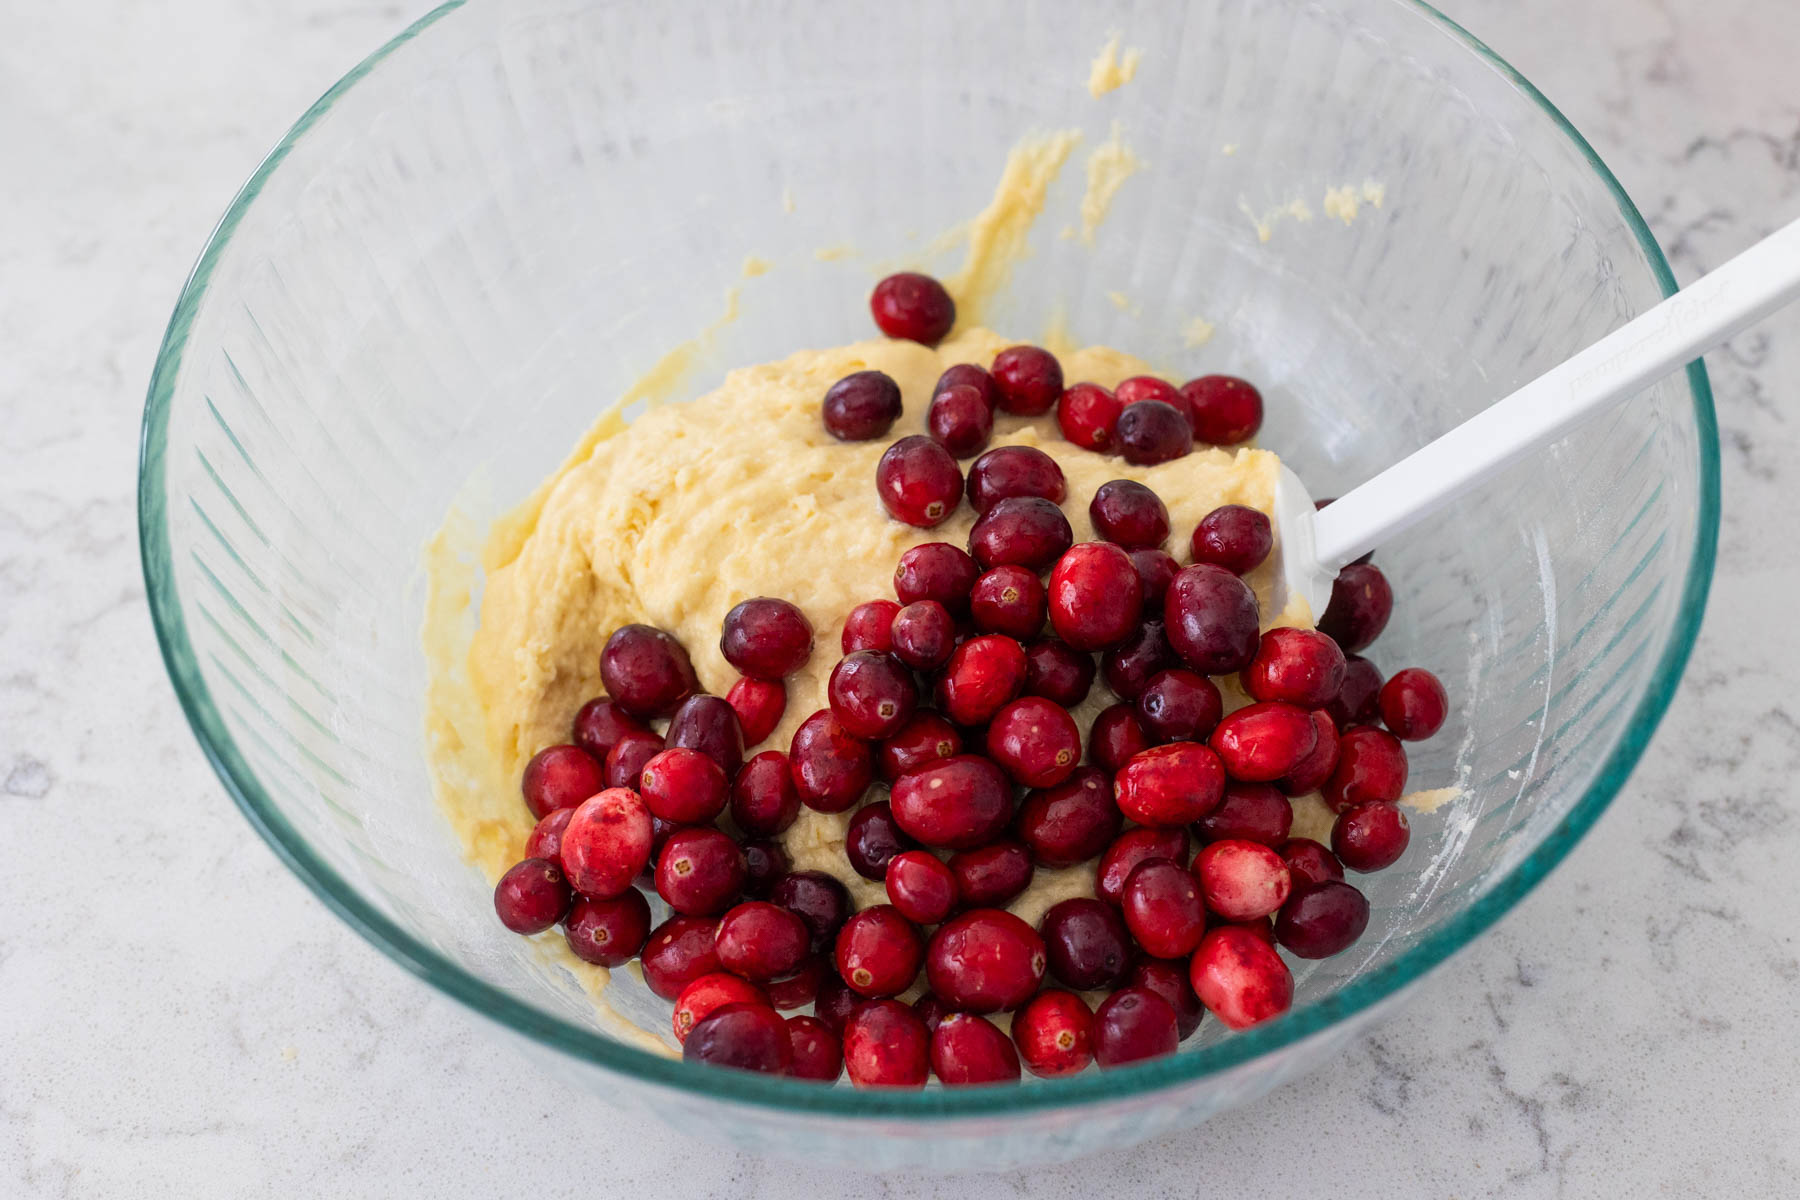 The fresh cranberries have been added to the mixing bowl.